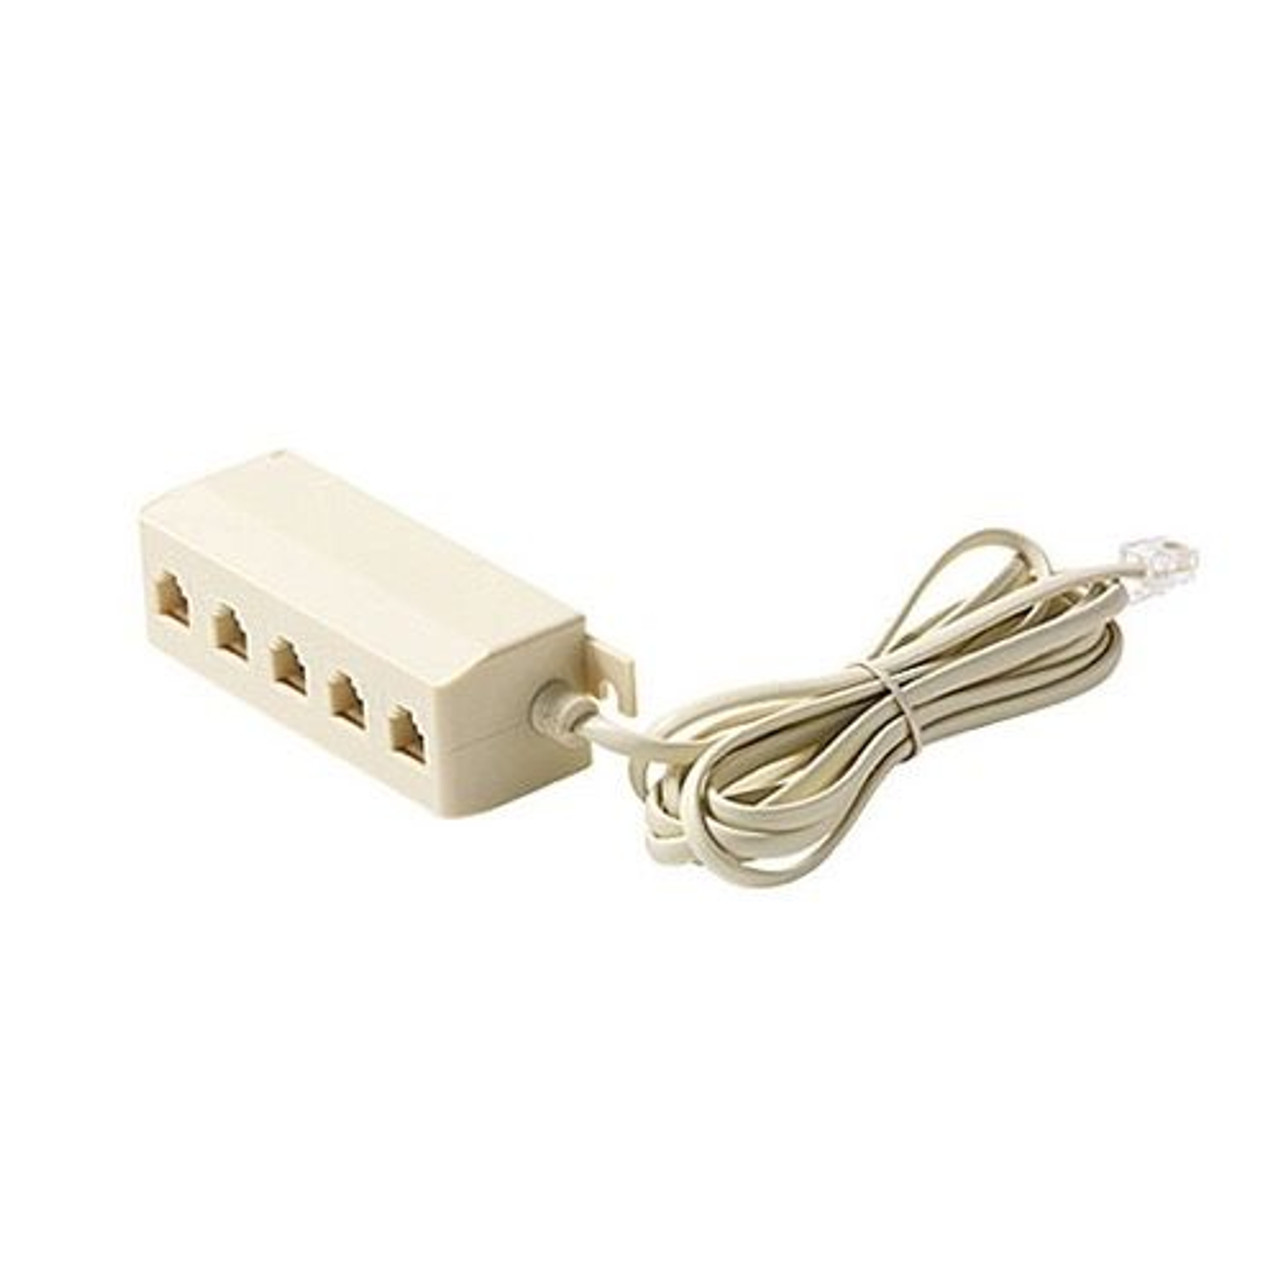 Steren 300-142 5 Outlet Telephone Extension Cord 6.5 FT Splitter Modular Ivory 4 Conductor One Phone Outlet to 5 Telephones 5 Port Surface Mount Jack Block Junction Box Ivory, Part # 300142